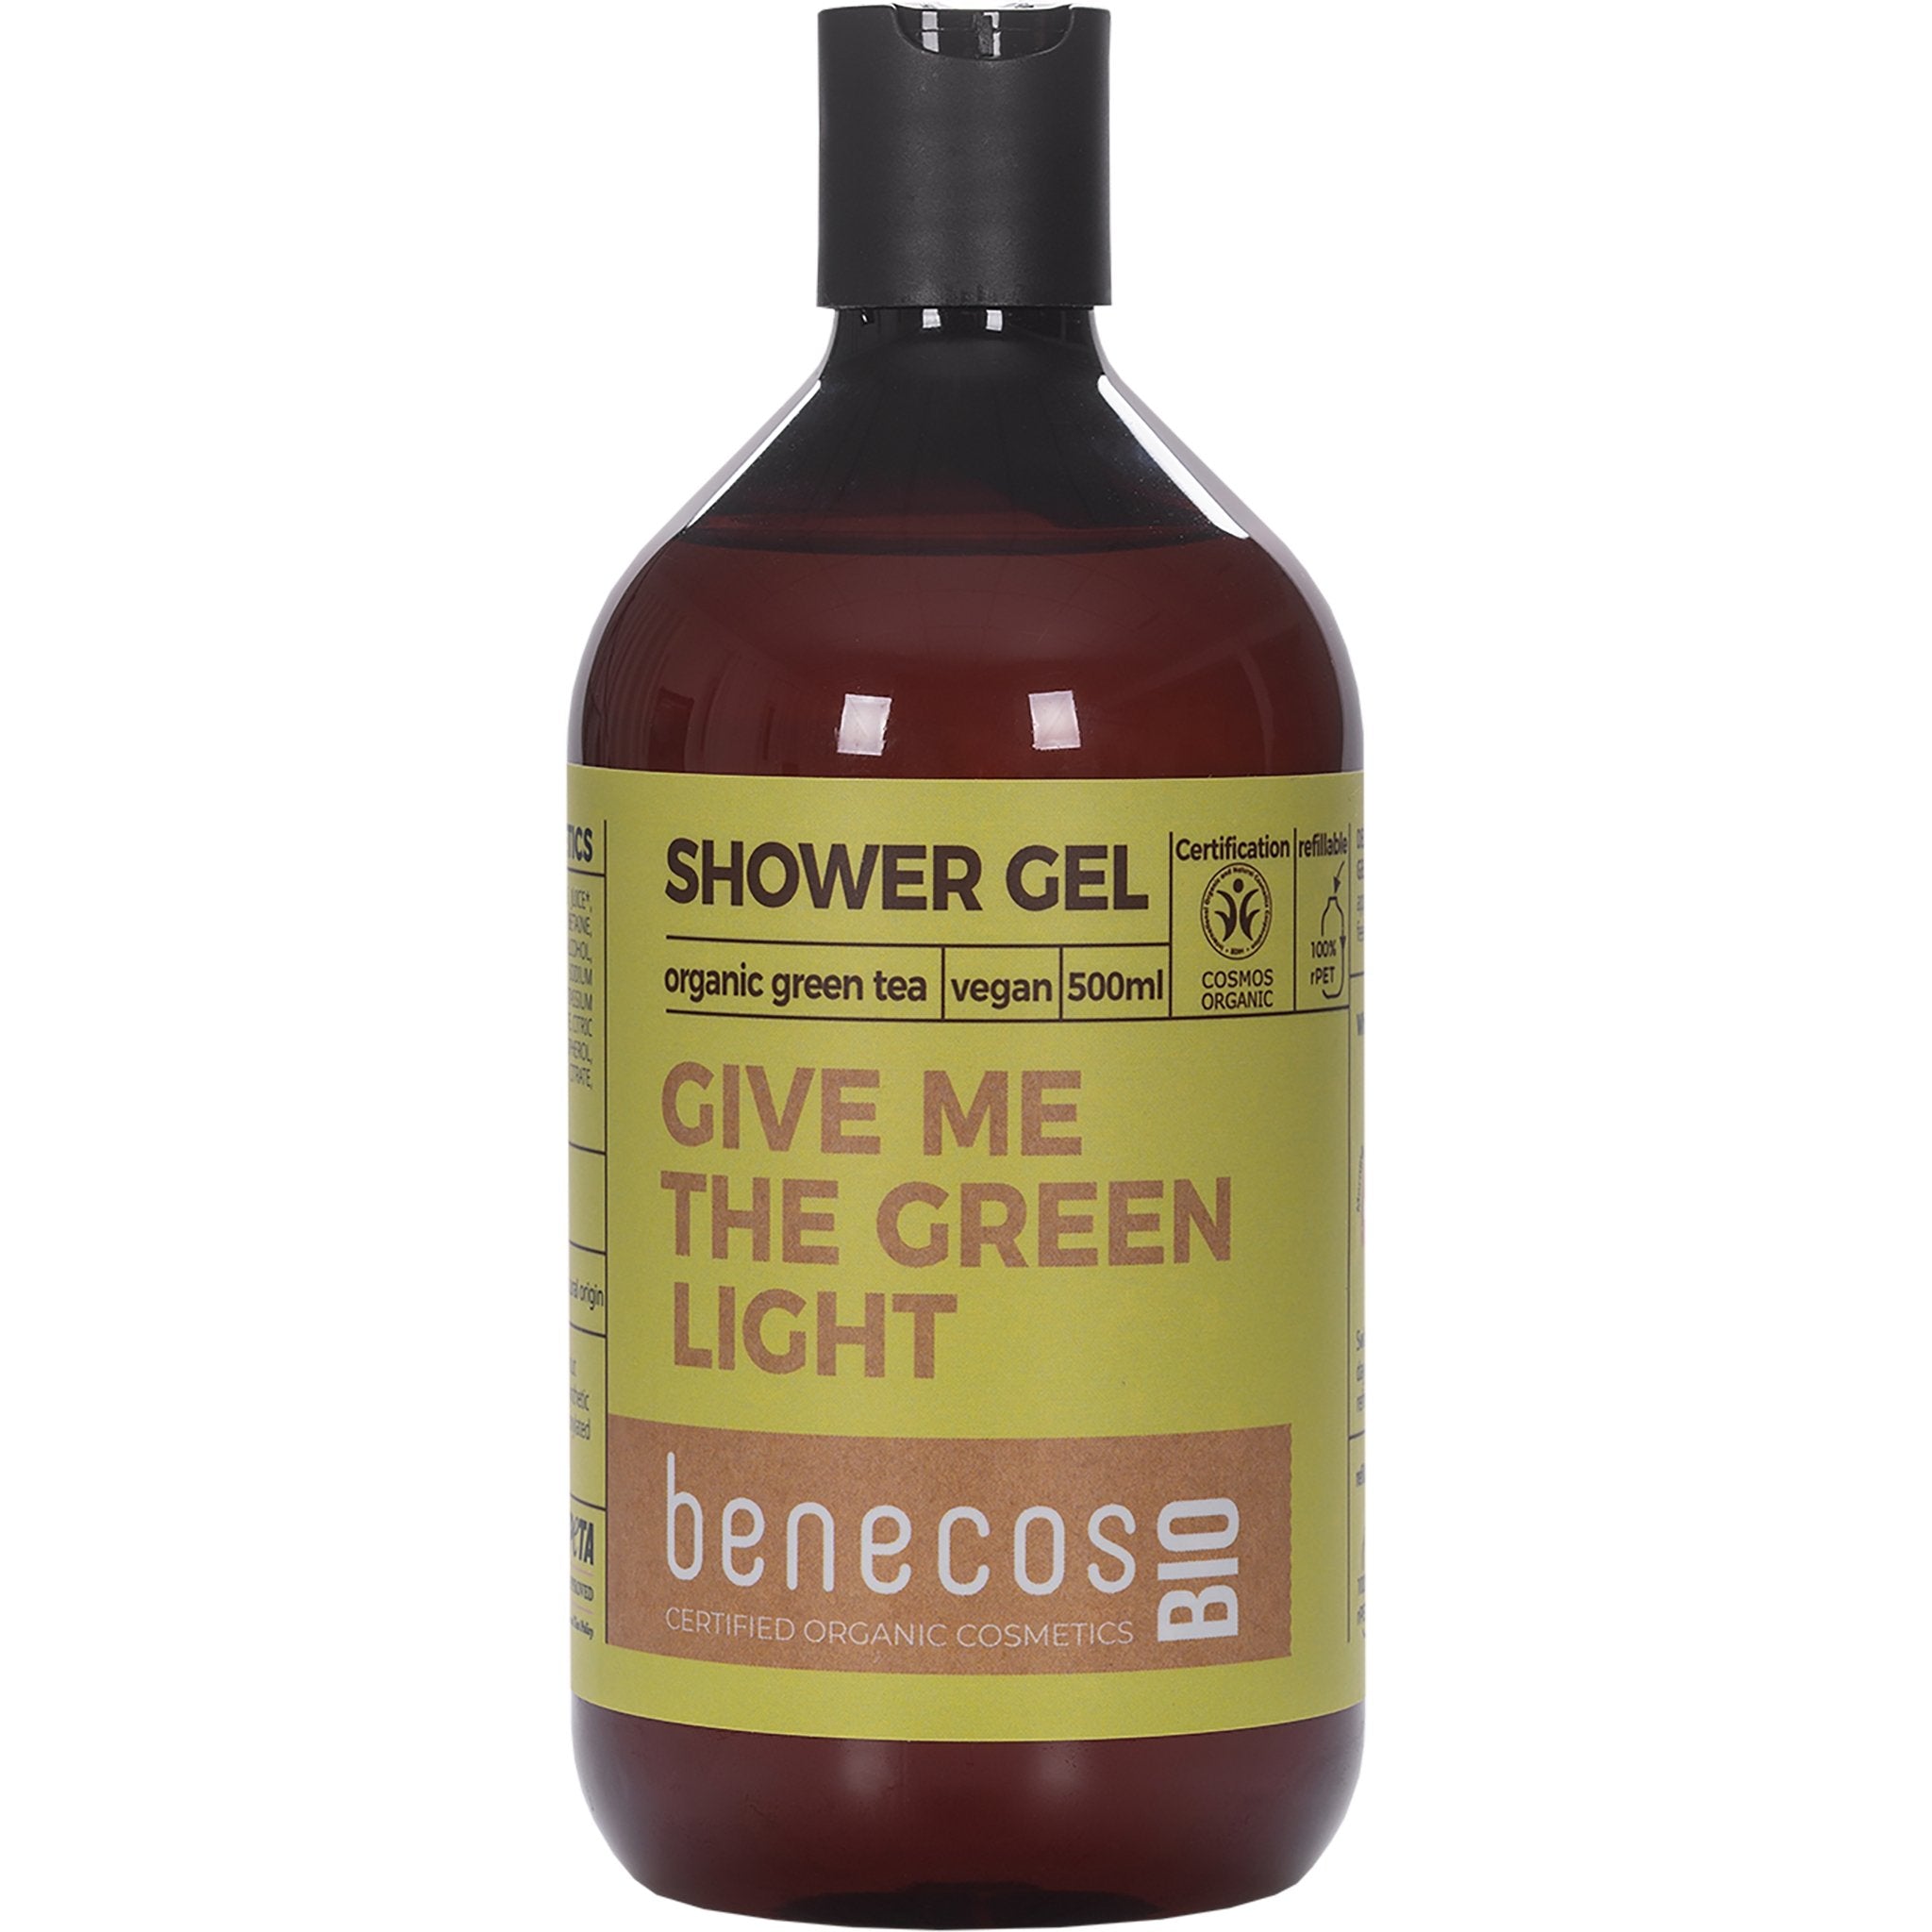 NEW Give Me The Green Light Shower Gel - mypure.co.uk